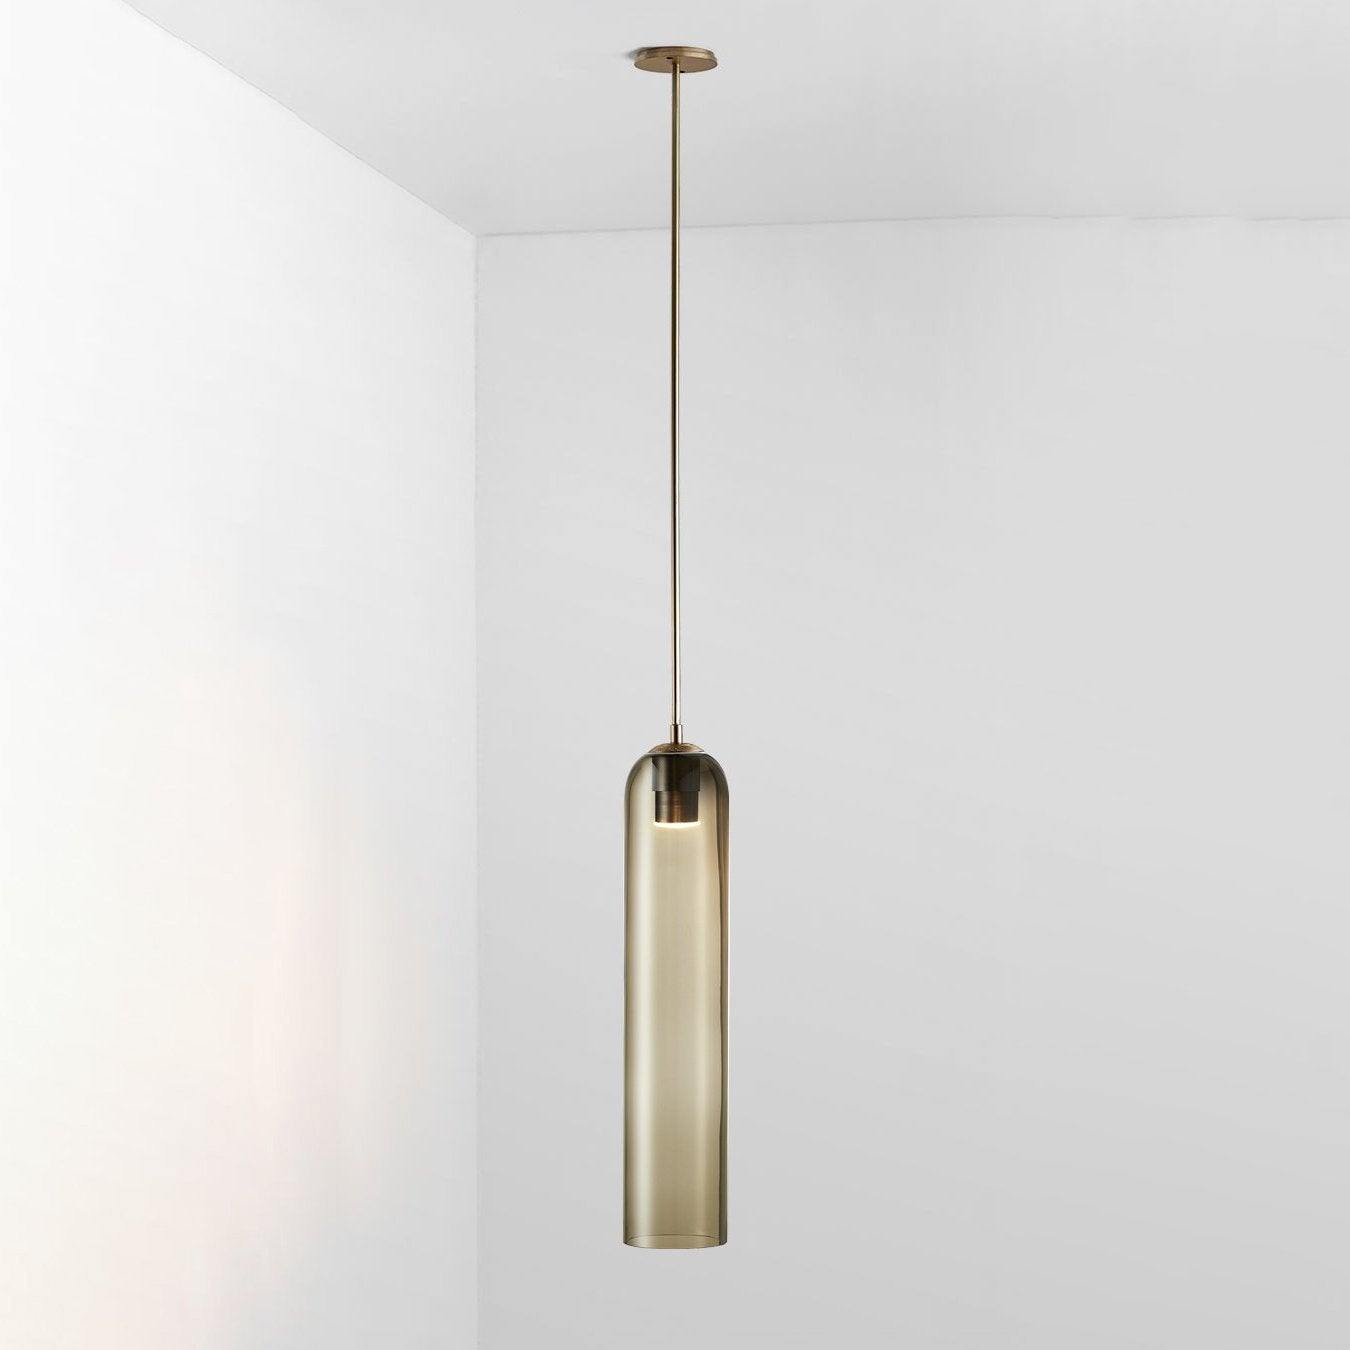 Glass wall sconce/pendant lamp 